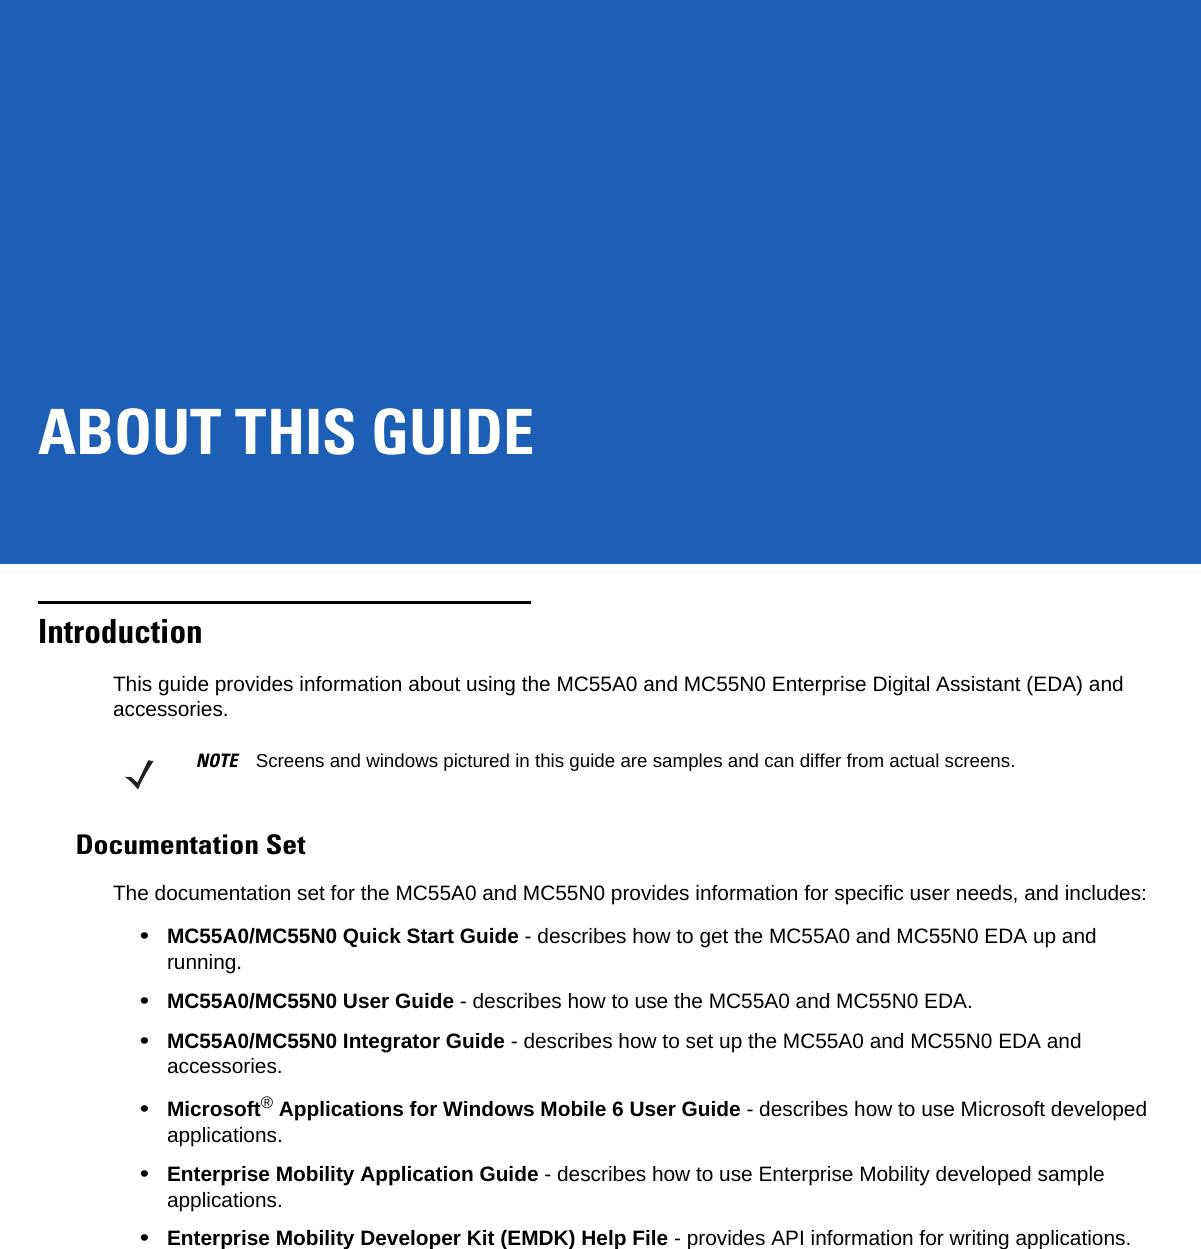 ABOUT THIS GUIDEIntroductionThis guide provides information about using the MC55A0 and MC55N0 Enterprise Digital Assistant (EDA) and accessories.Documentation SetThe documentation set for the MC55A0 and MC55N0 provides information for specific user needs, and includes:•MC55A0/MC55N0 Quick Start Guide - describes how to get the MC55A0 and MC55N0 EDA up and running.•MC55A0/MC55N0 User Guide - describes how to use the MC55A0 and MC55N0 EDA.•MC55A0/MC55N0 Integrator Guide - describes how to set up the MC55A0 and MC55N0 EDA and accessories.•Microsoft® Applications for Windows Mobile 6 User Guide - describes how to use Microsoft developed applications.•Enterprise Mobility Application Guide - describes how to use Enterprise Mobility developed sample applications.•Enterprise Mobility Developer Kit (EMDK) Help File - provides API information for writing applications.NOTE Screens and windows pictured in this guide are samples and can differ from actual screens.